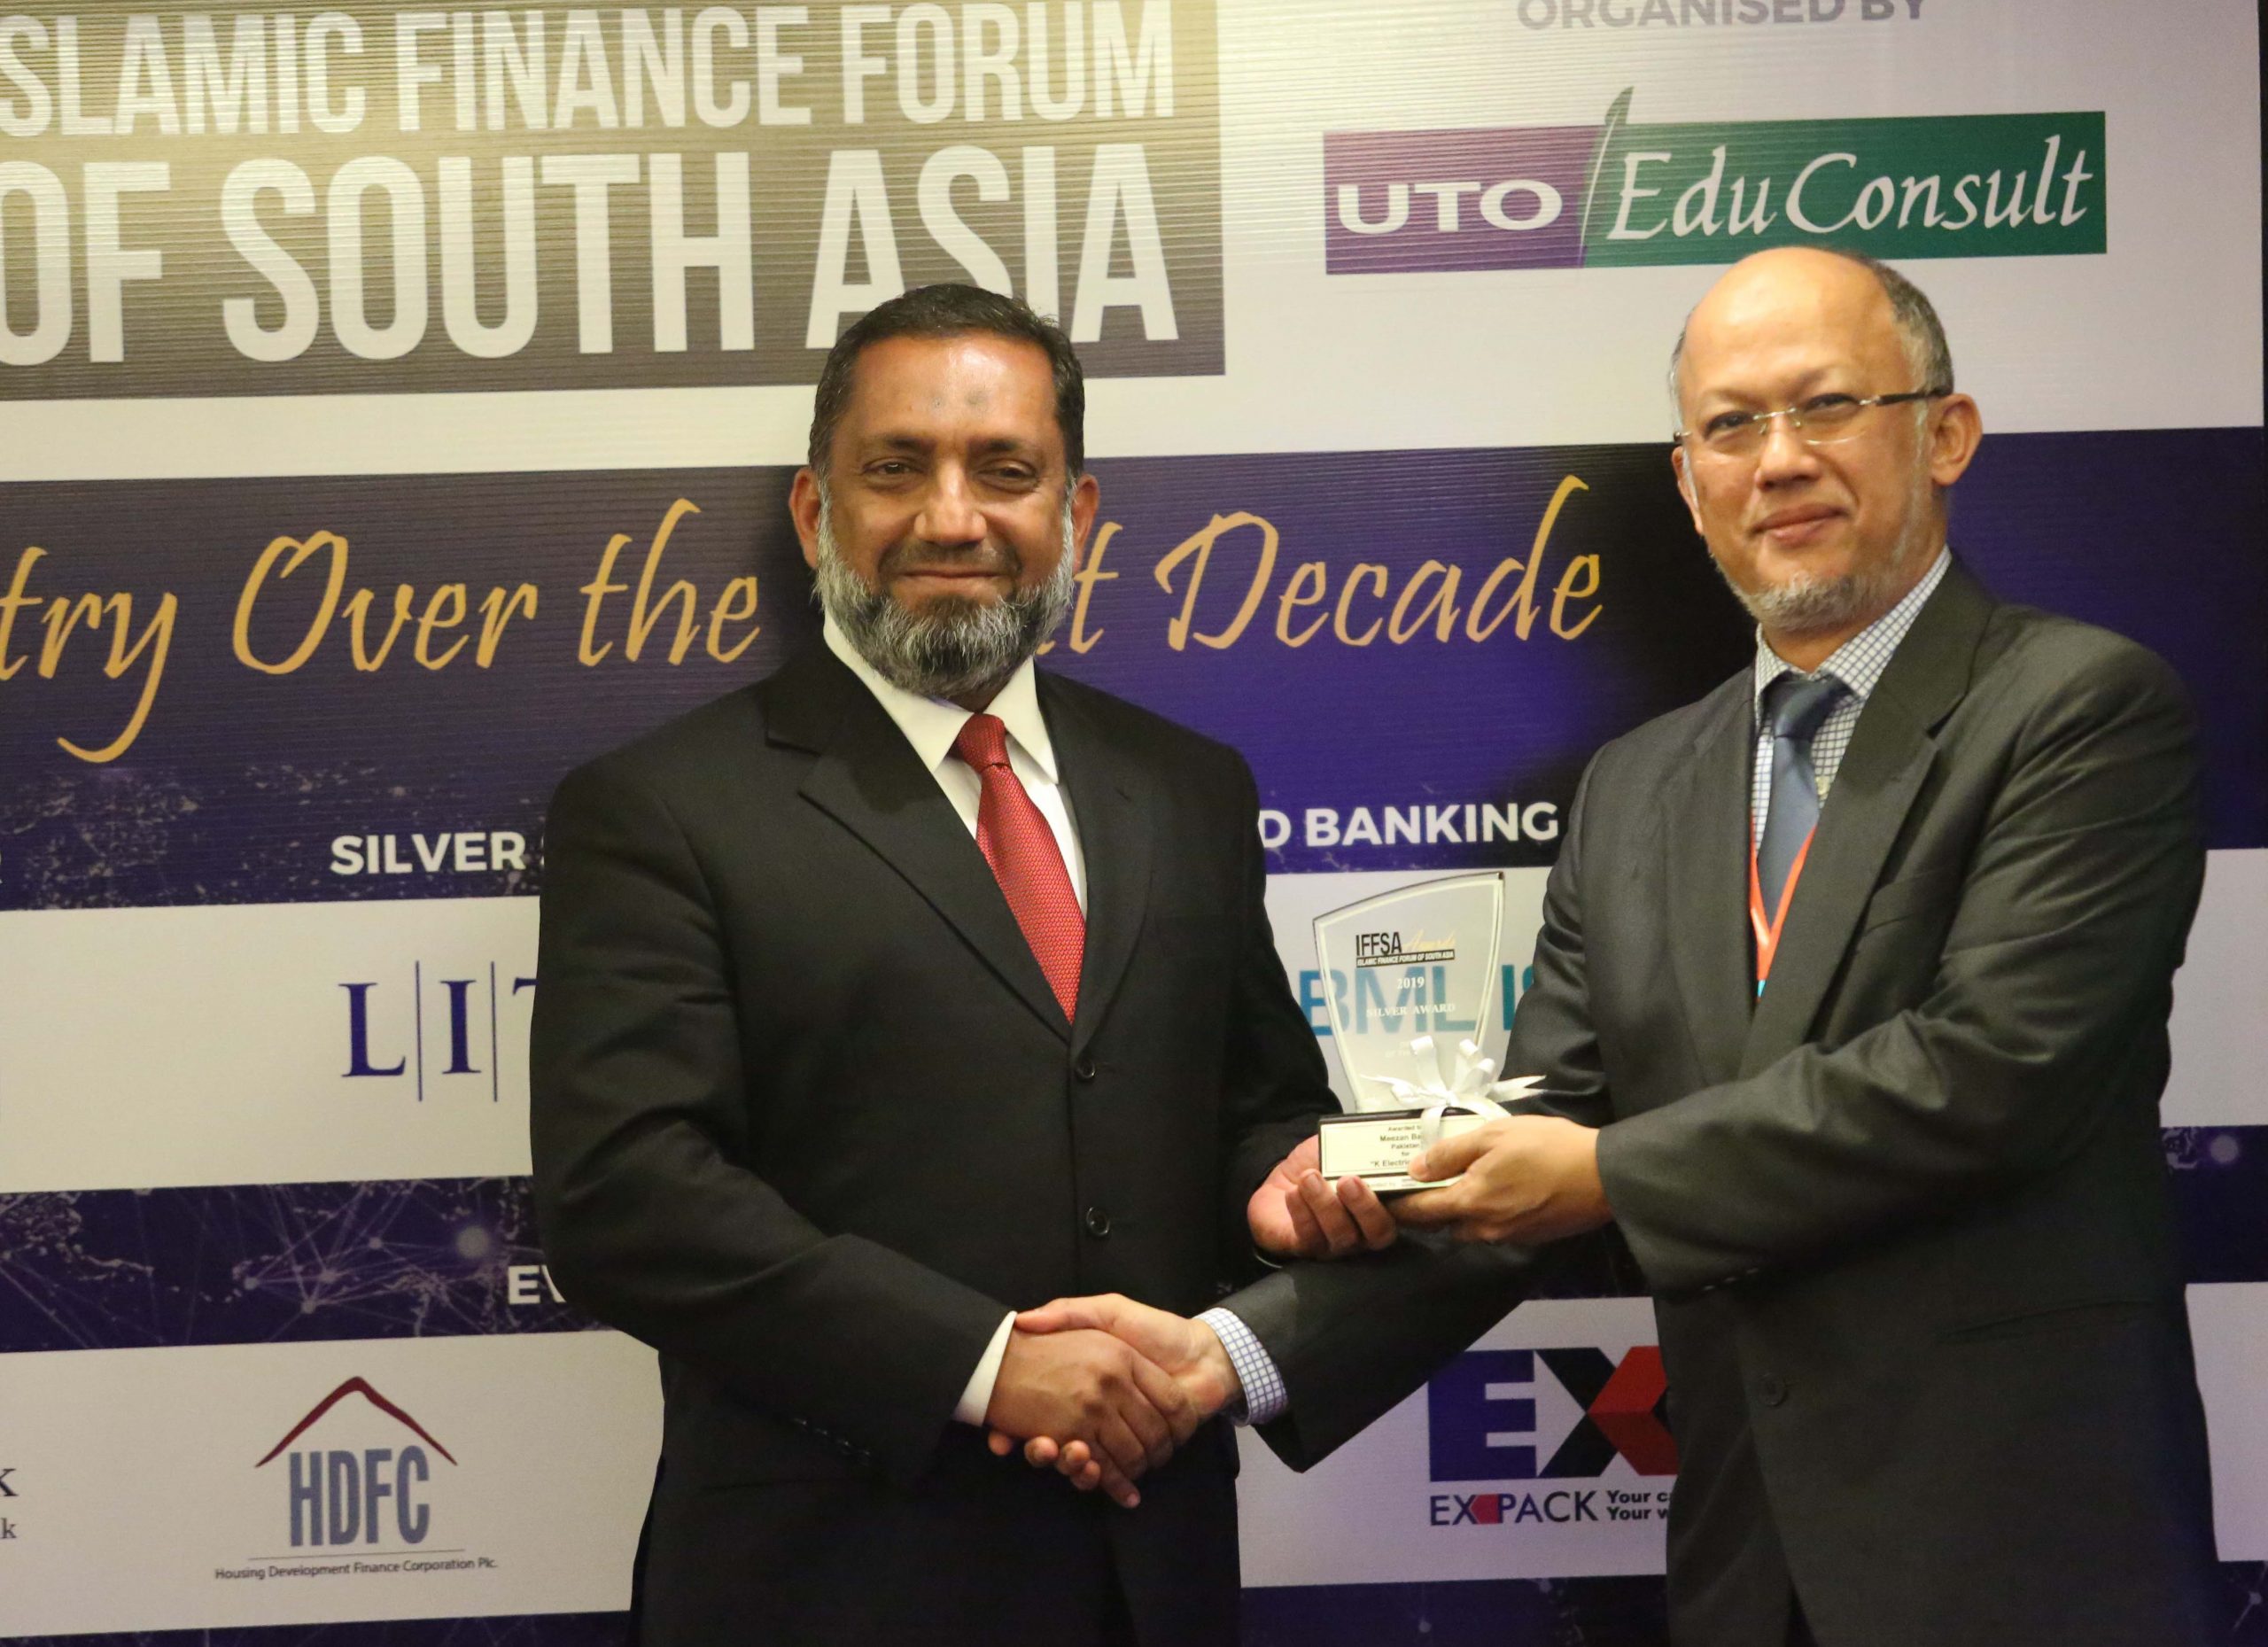 Meezan Bank receives Special Award amongst others at Islamic Finance ...